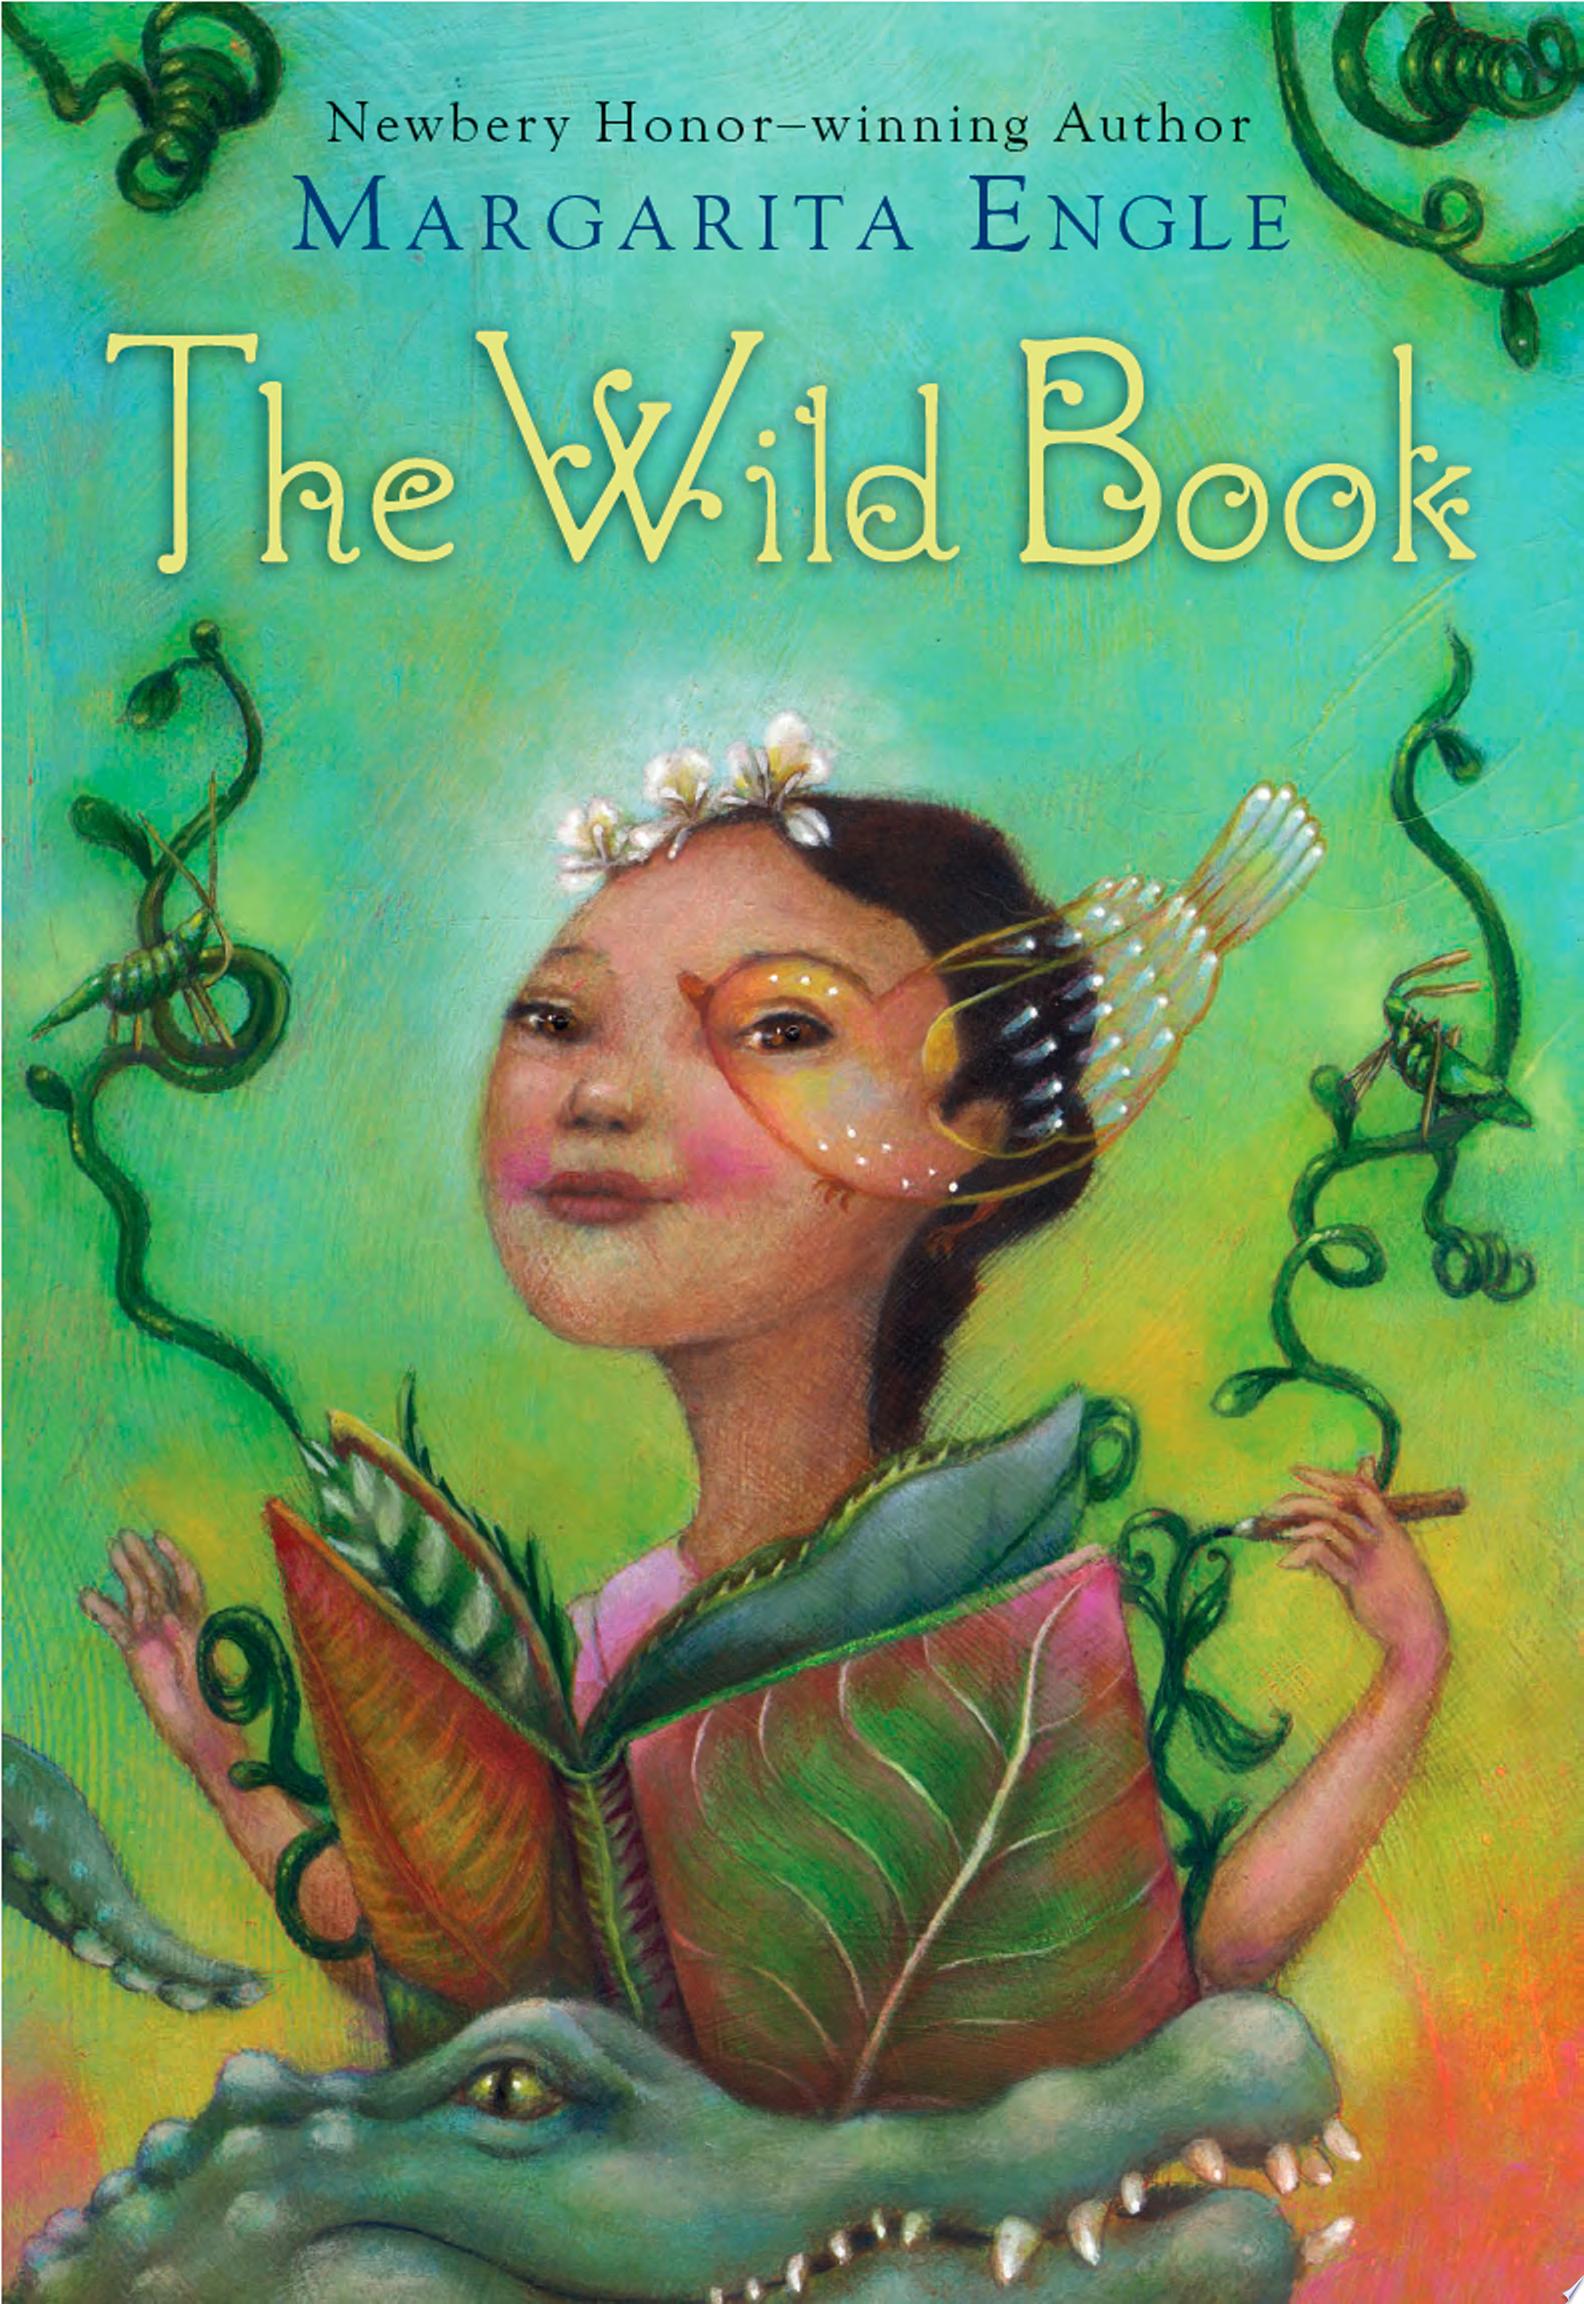 Image for "The Wild Book"